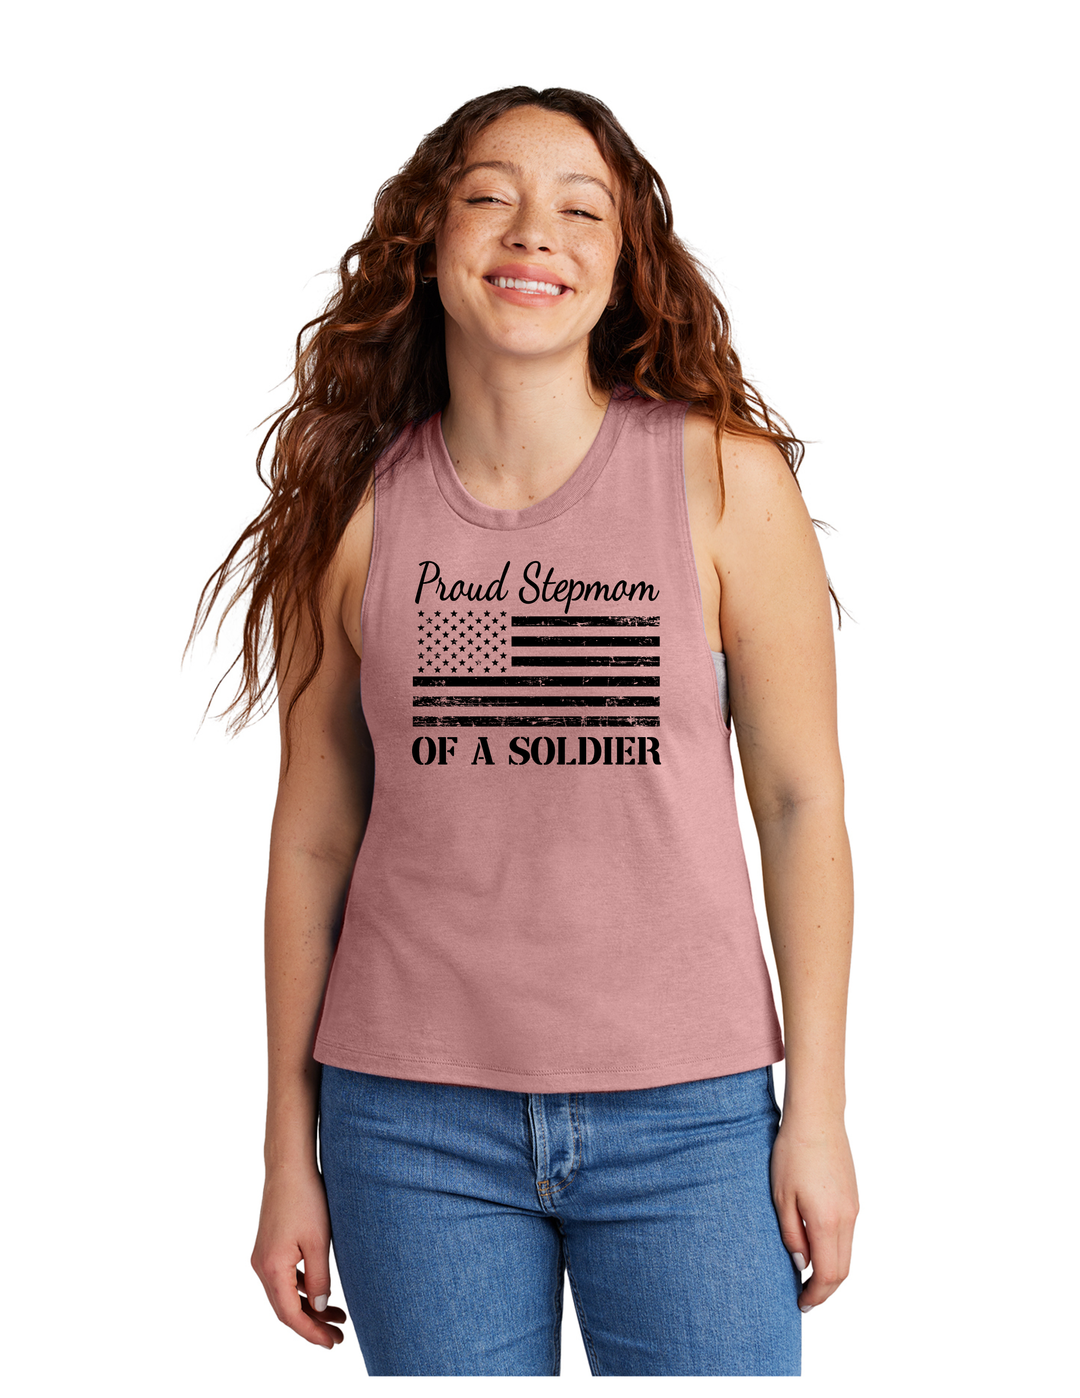 Proud Stepmom of a Soldier Muscle Tank (Pink)